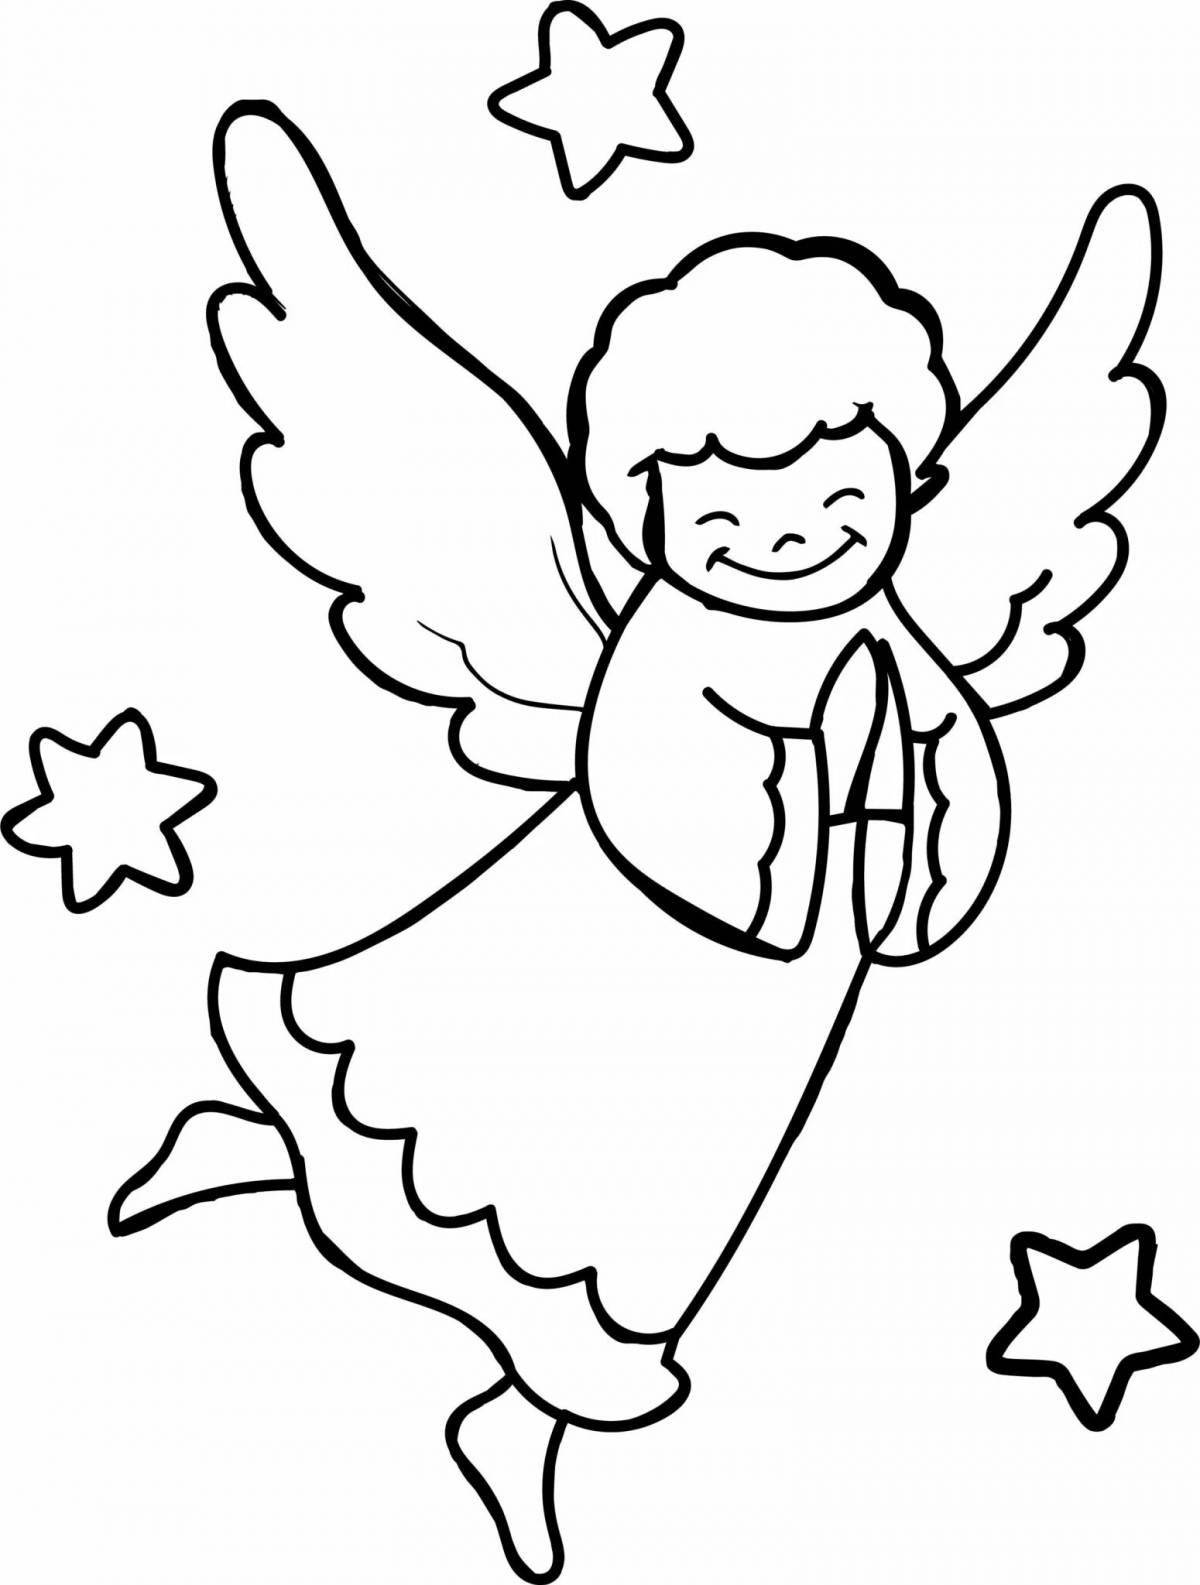 Coloring page festive christmas angel